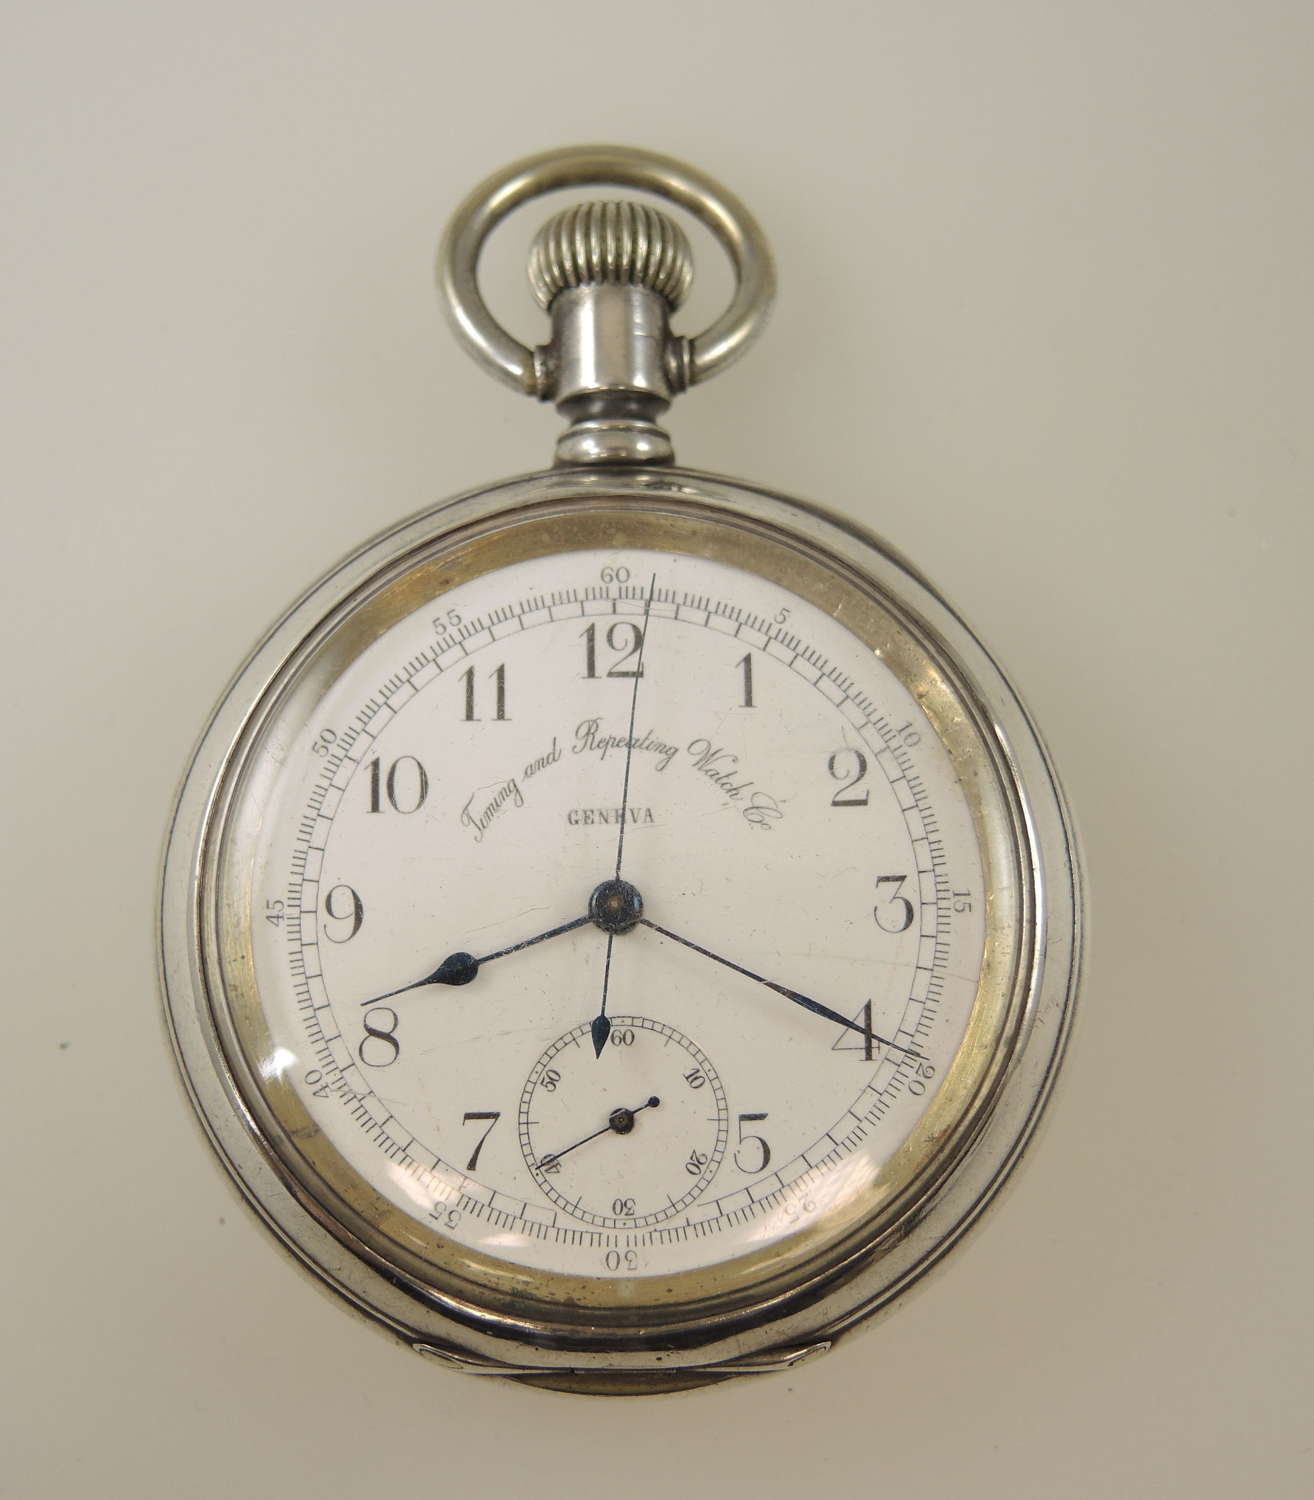 Silver Chronograph pocket watch. Timing & Repeating Watch Co c1900